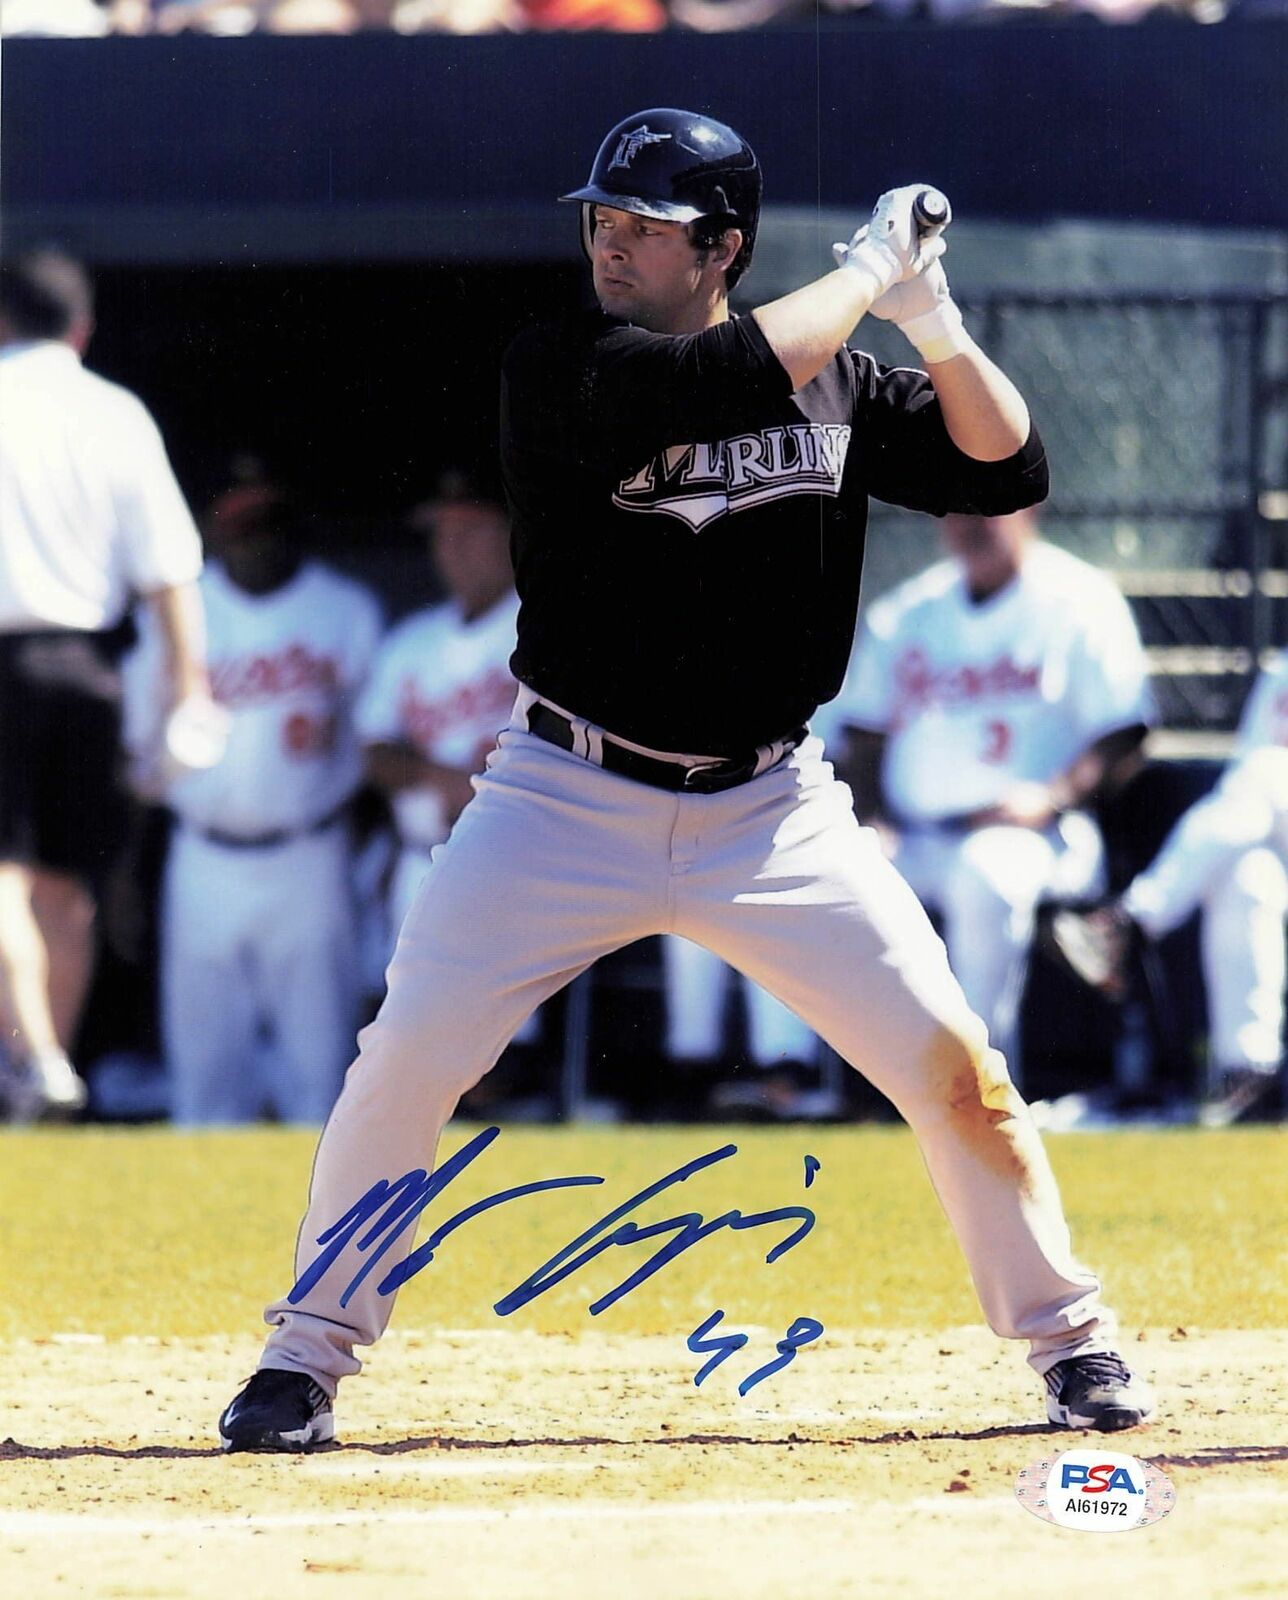 MATT CEPICKY signed 8x10 Photo Poster painting PSA/DNA Florida Miami Marlins Autographed